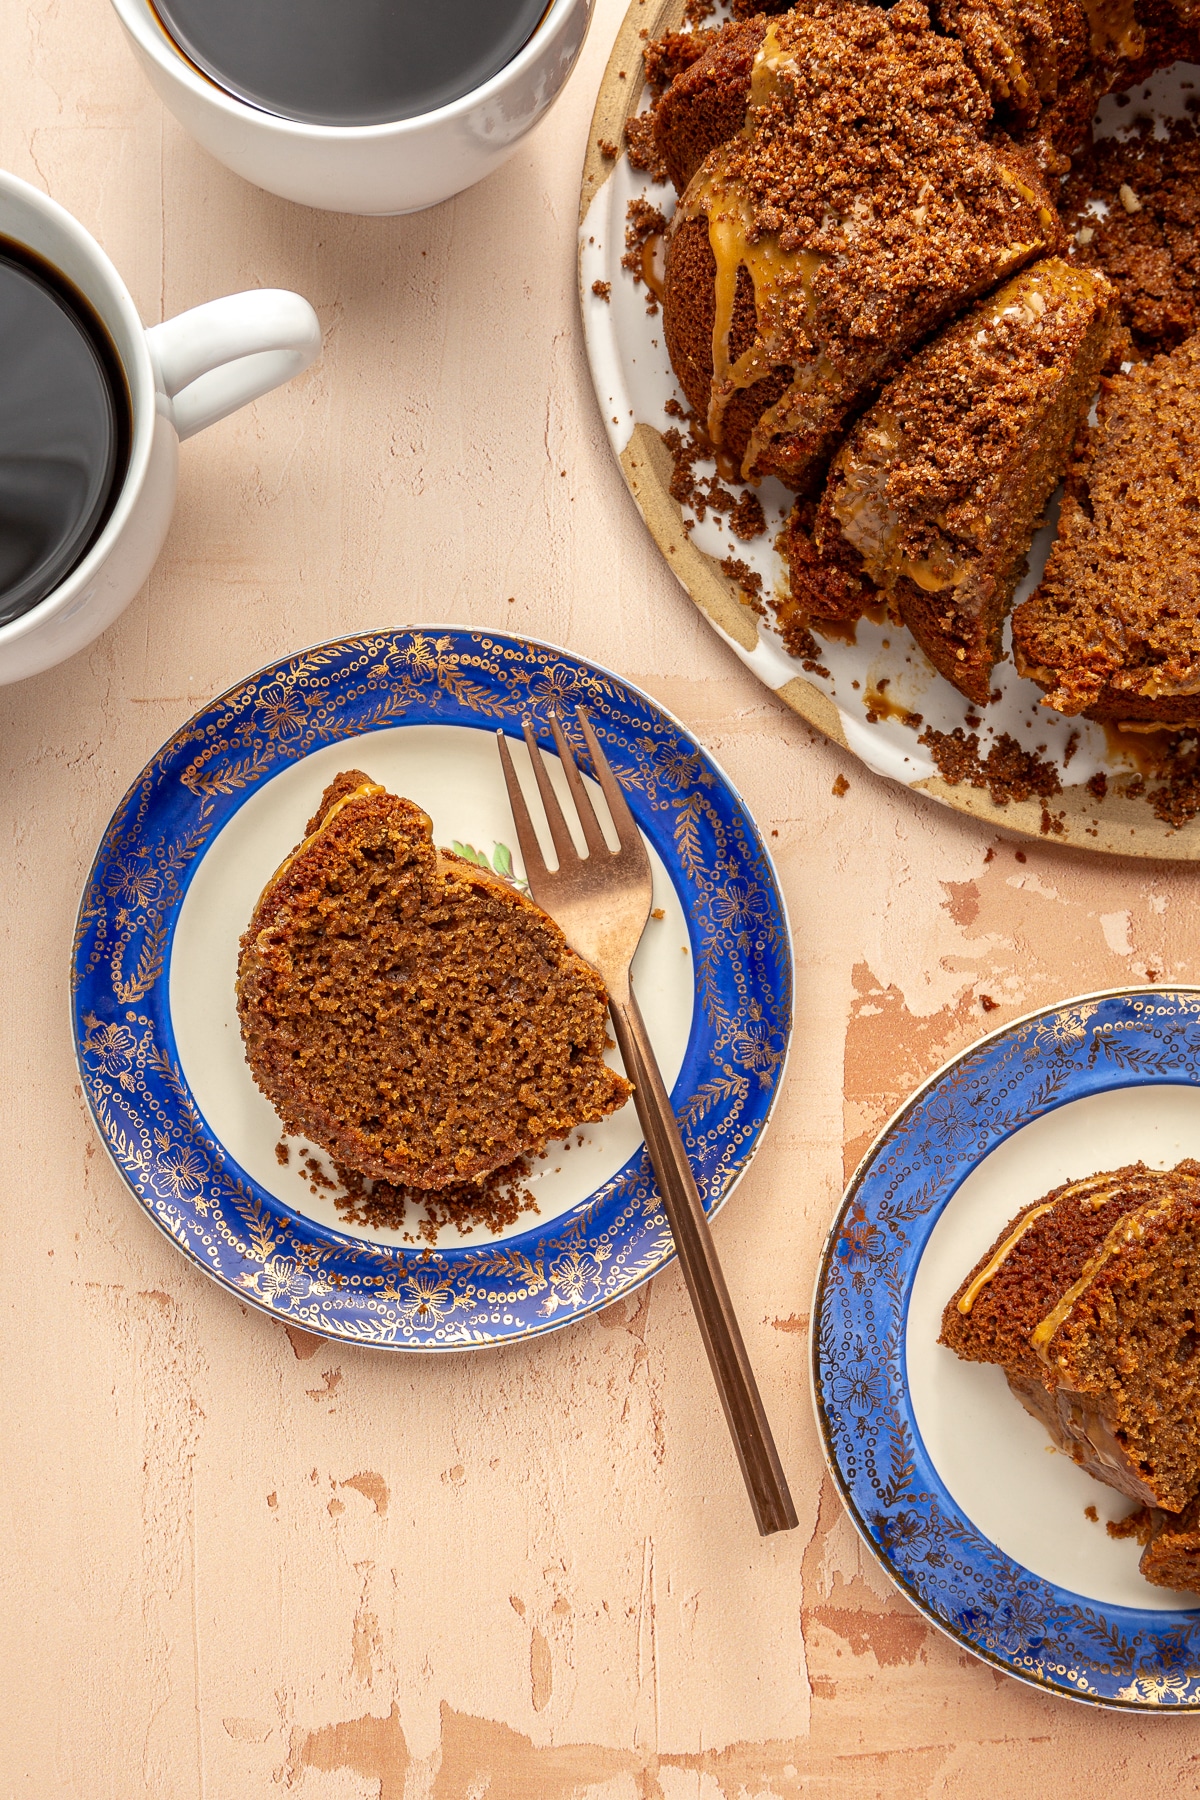 Two slices of pumpkin spice bundt cake on small blue and gold rimmed dessert plates next to two mugs of coffee and the rest of the bundt cake on a large plate.